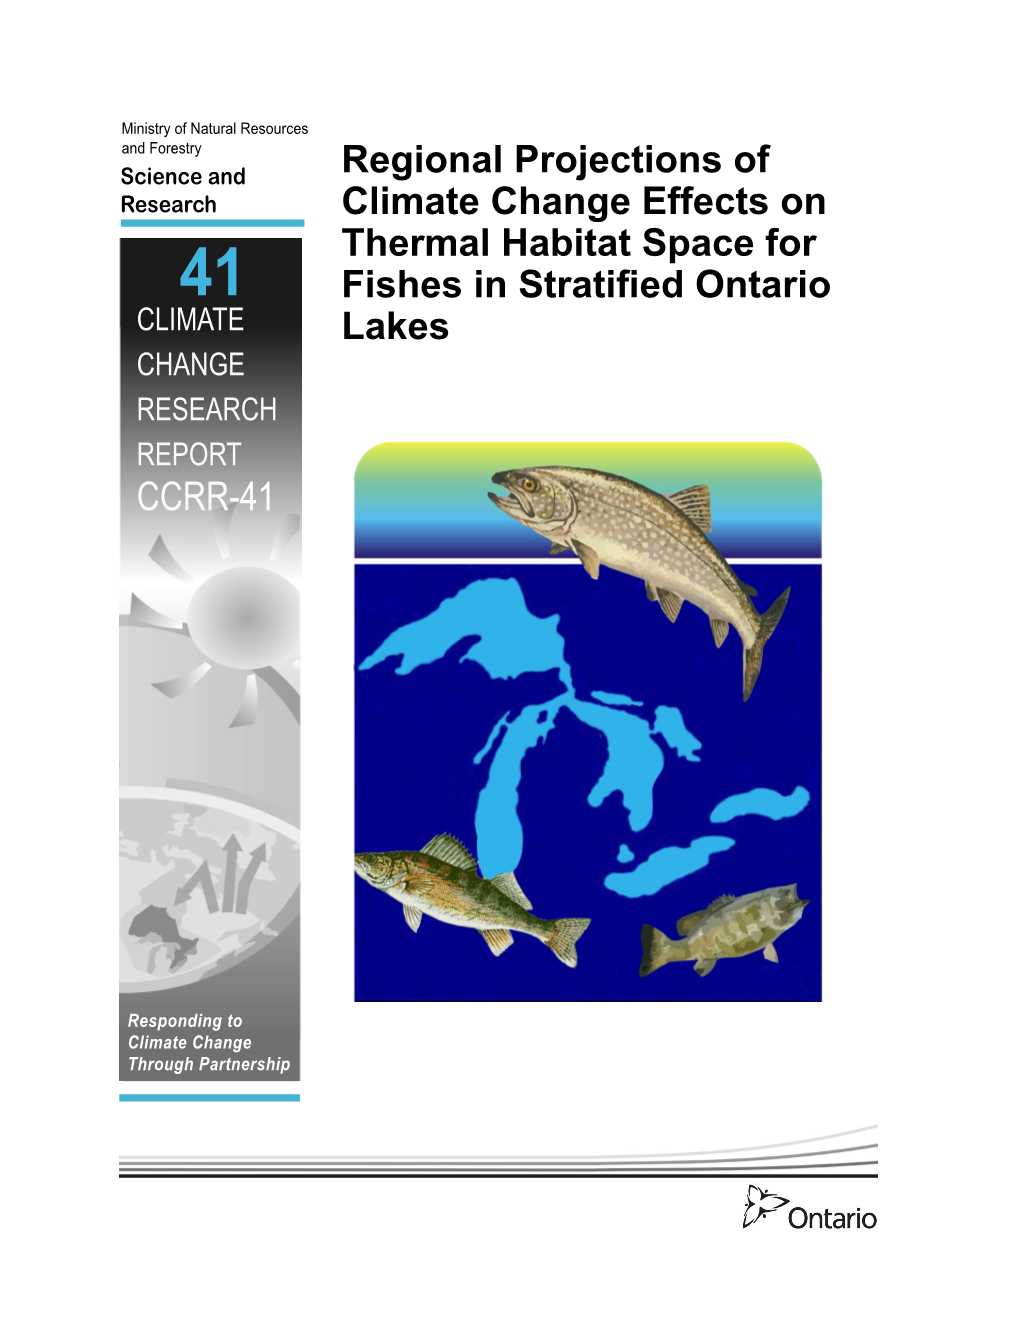 Regional Projections of Climate Change Effects on Thermal Habitat Space for Fishes in Stratified Ontario Lakes